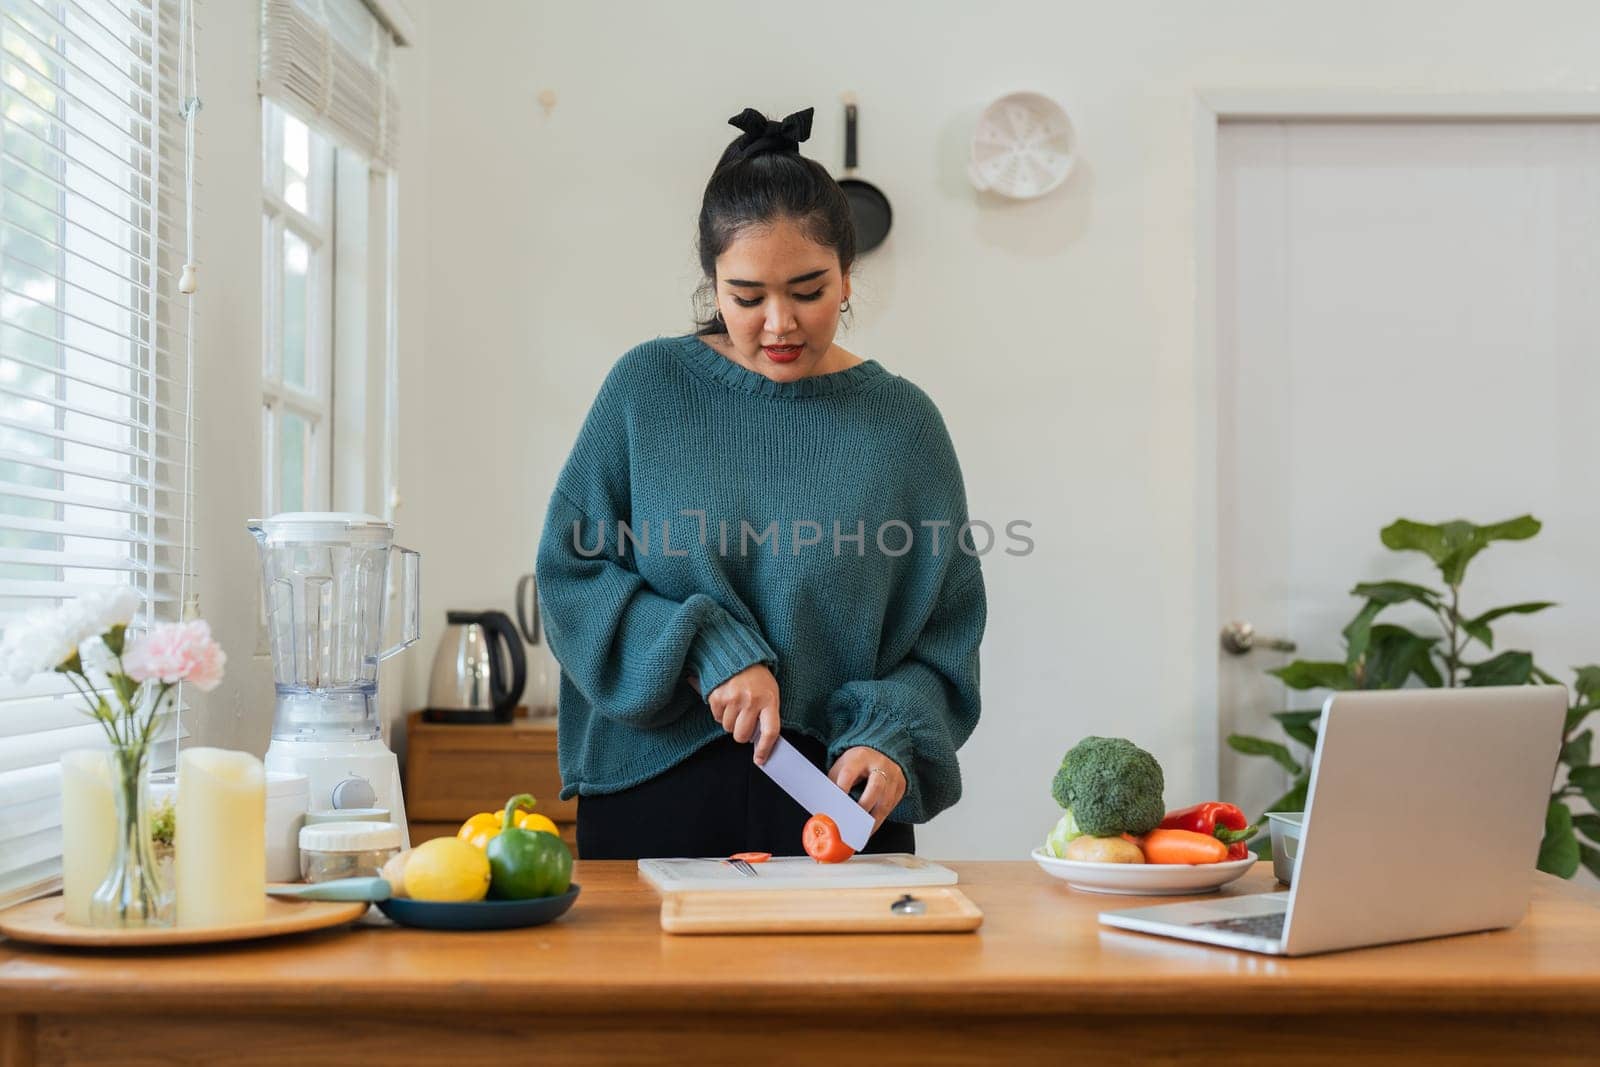 Fat woman cooking in kitchen and chopping fresh vegetables on chopping board. Learn to make salads and healthy food from online. health care concept Eat healthy food to lose weight.